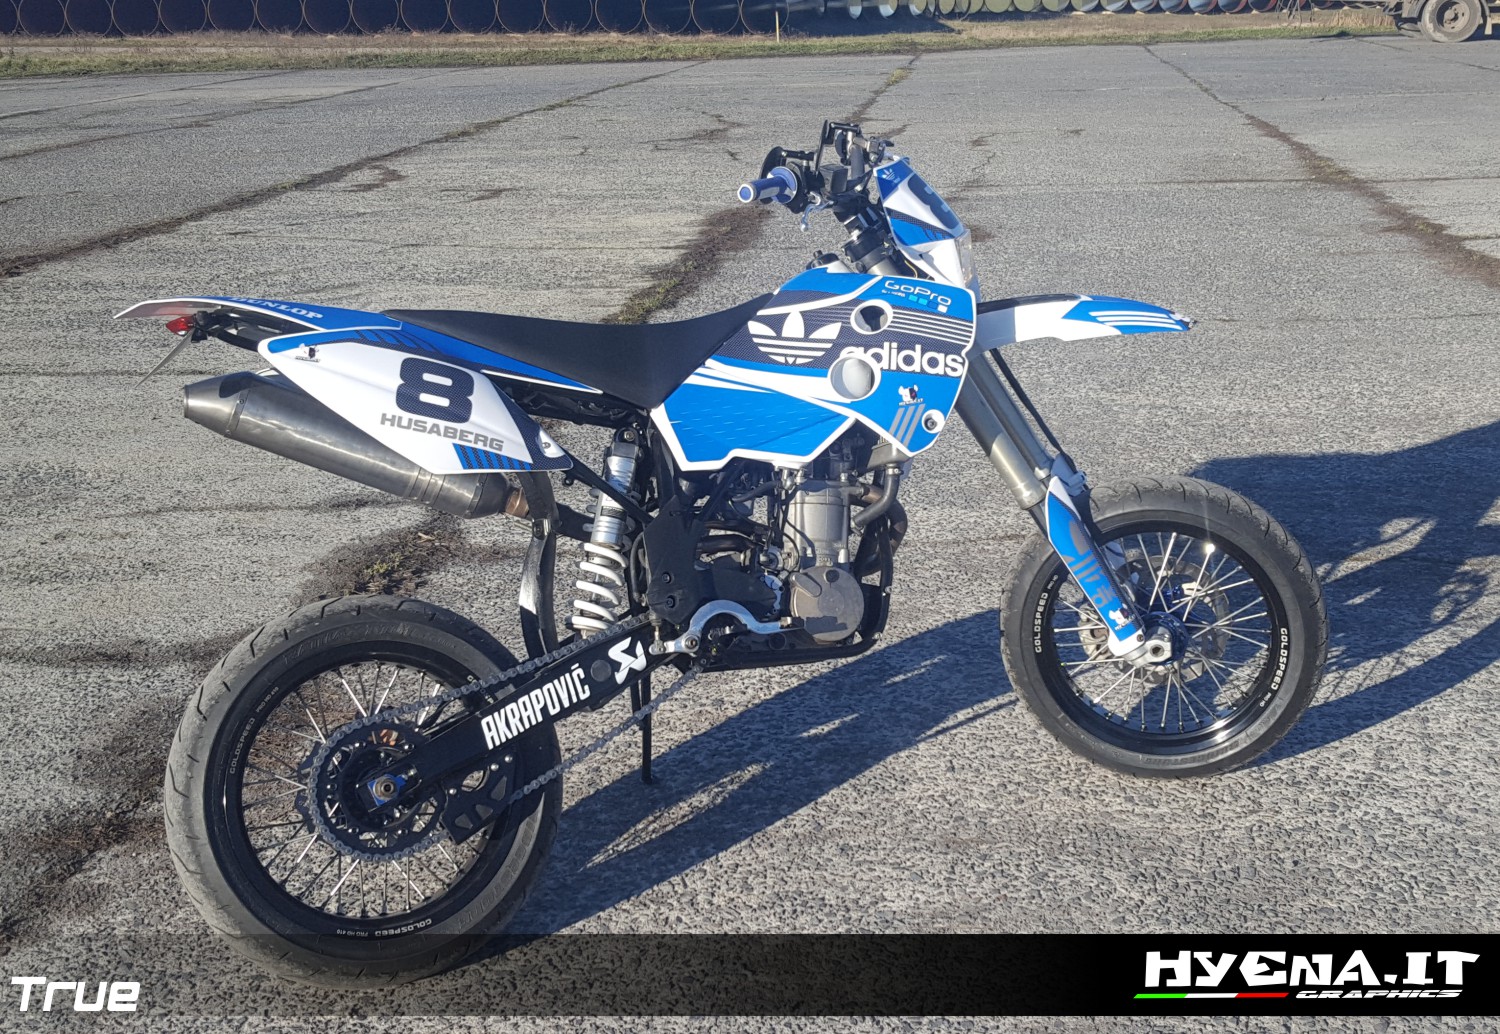 Customized Graphic Kit For Husaberg Fe 450 2004 Customized Decals For Husaberg Fe 450 2004 Graphic Husaberg Fe 450 2004 Decals Husaberg Fe 450 2004 Fe 450 Customized Graphics Kit